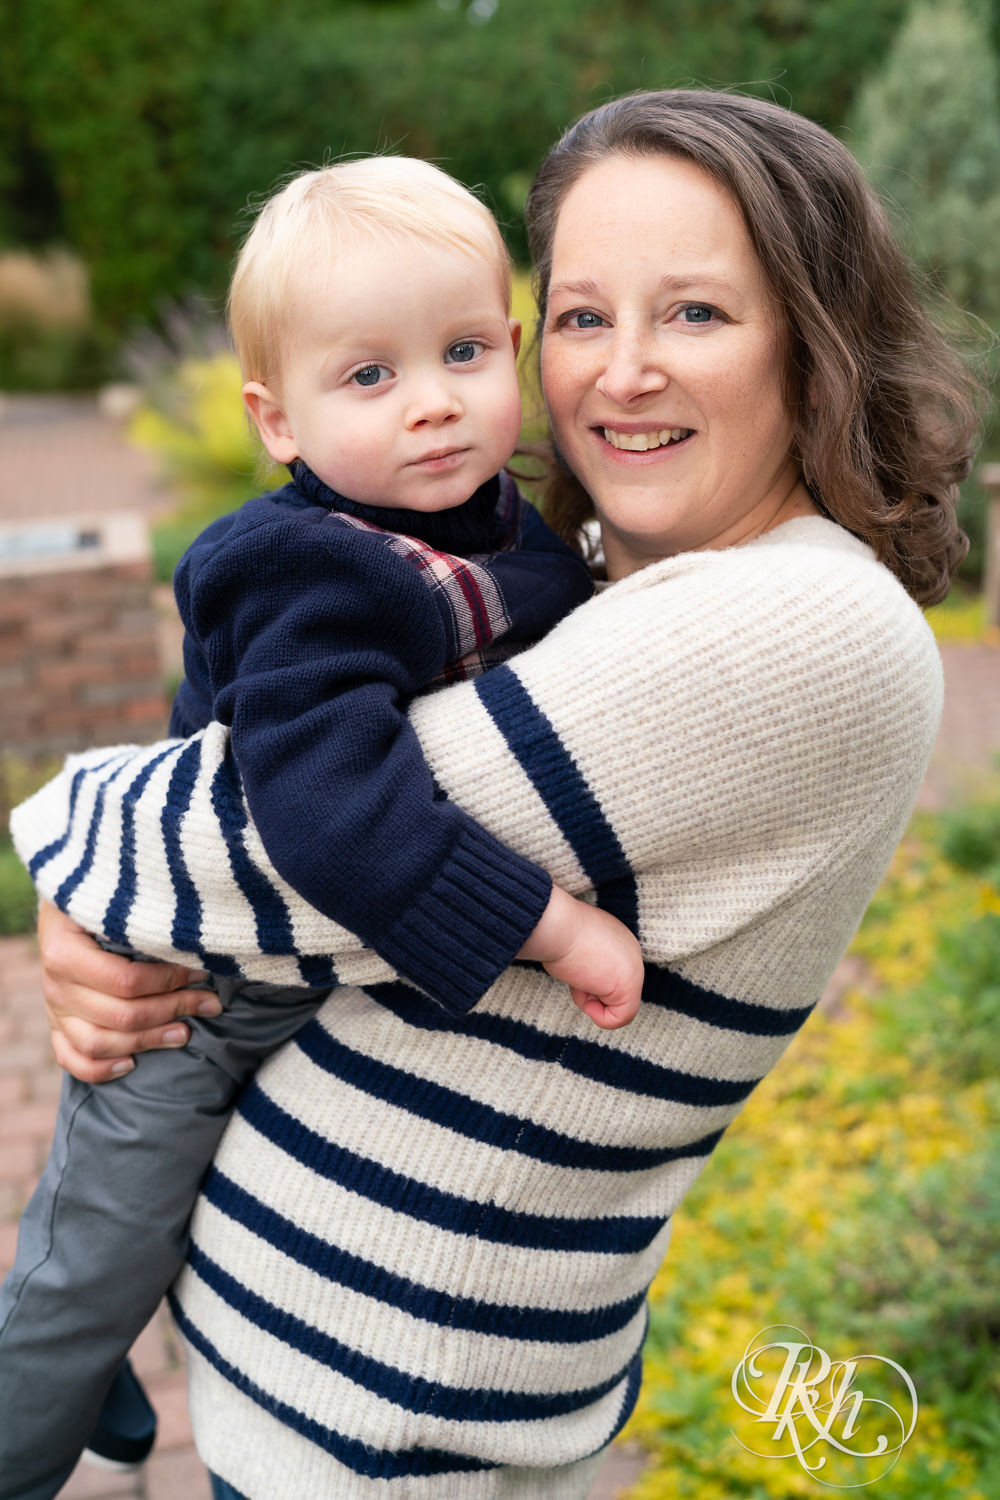 Morning family photography with mother and son at Centennial Lakes Park in Edina, Minnesota.